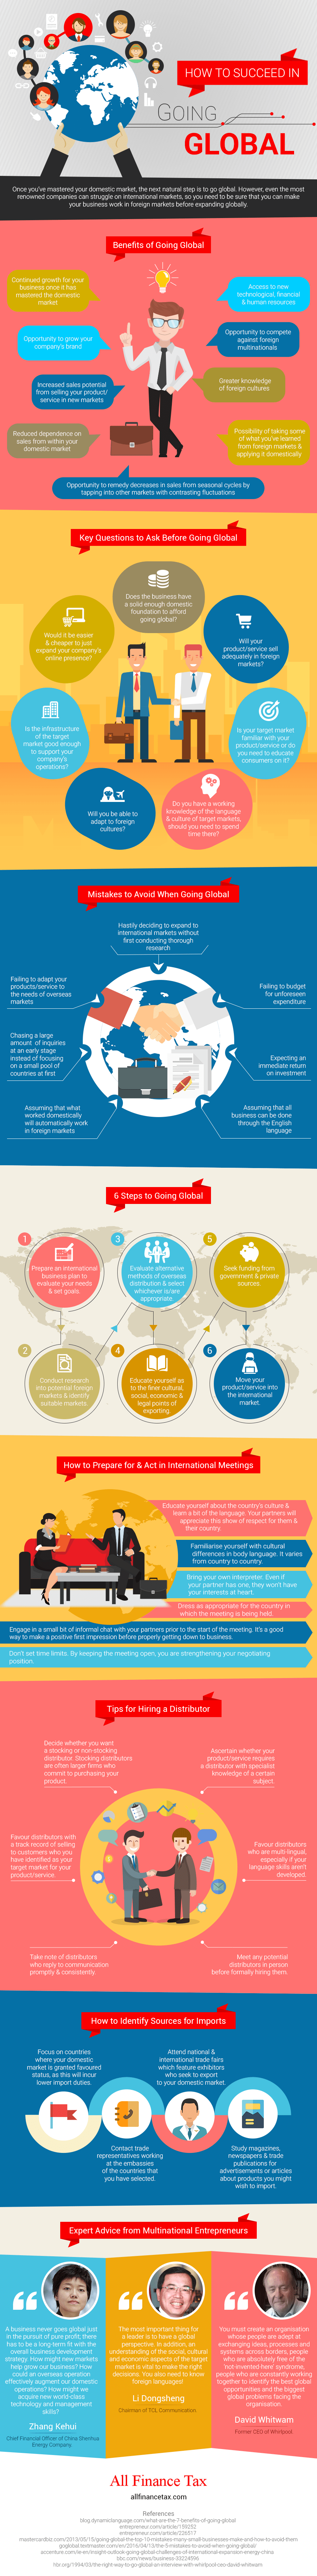 how-to-succeed-in-going-global-infographic